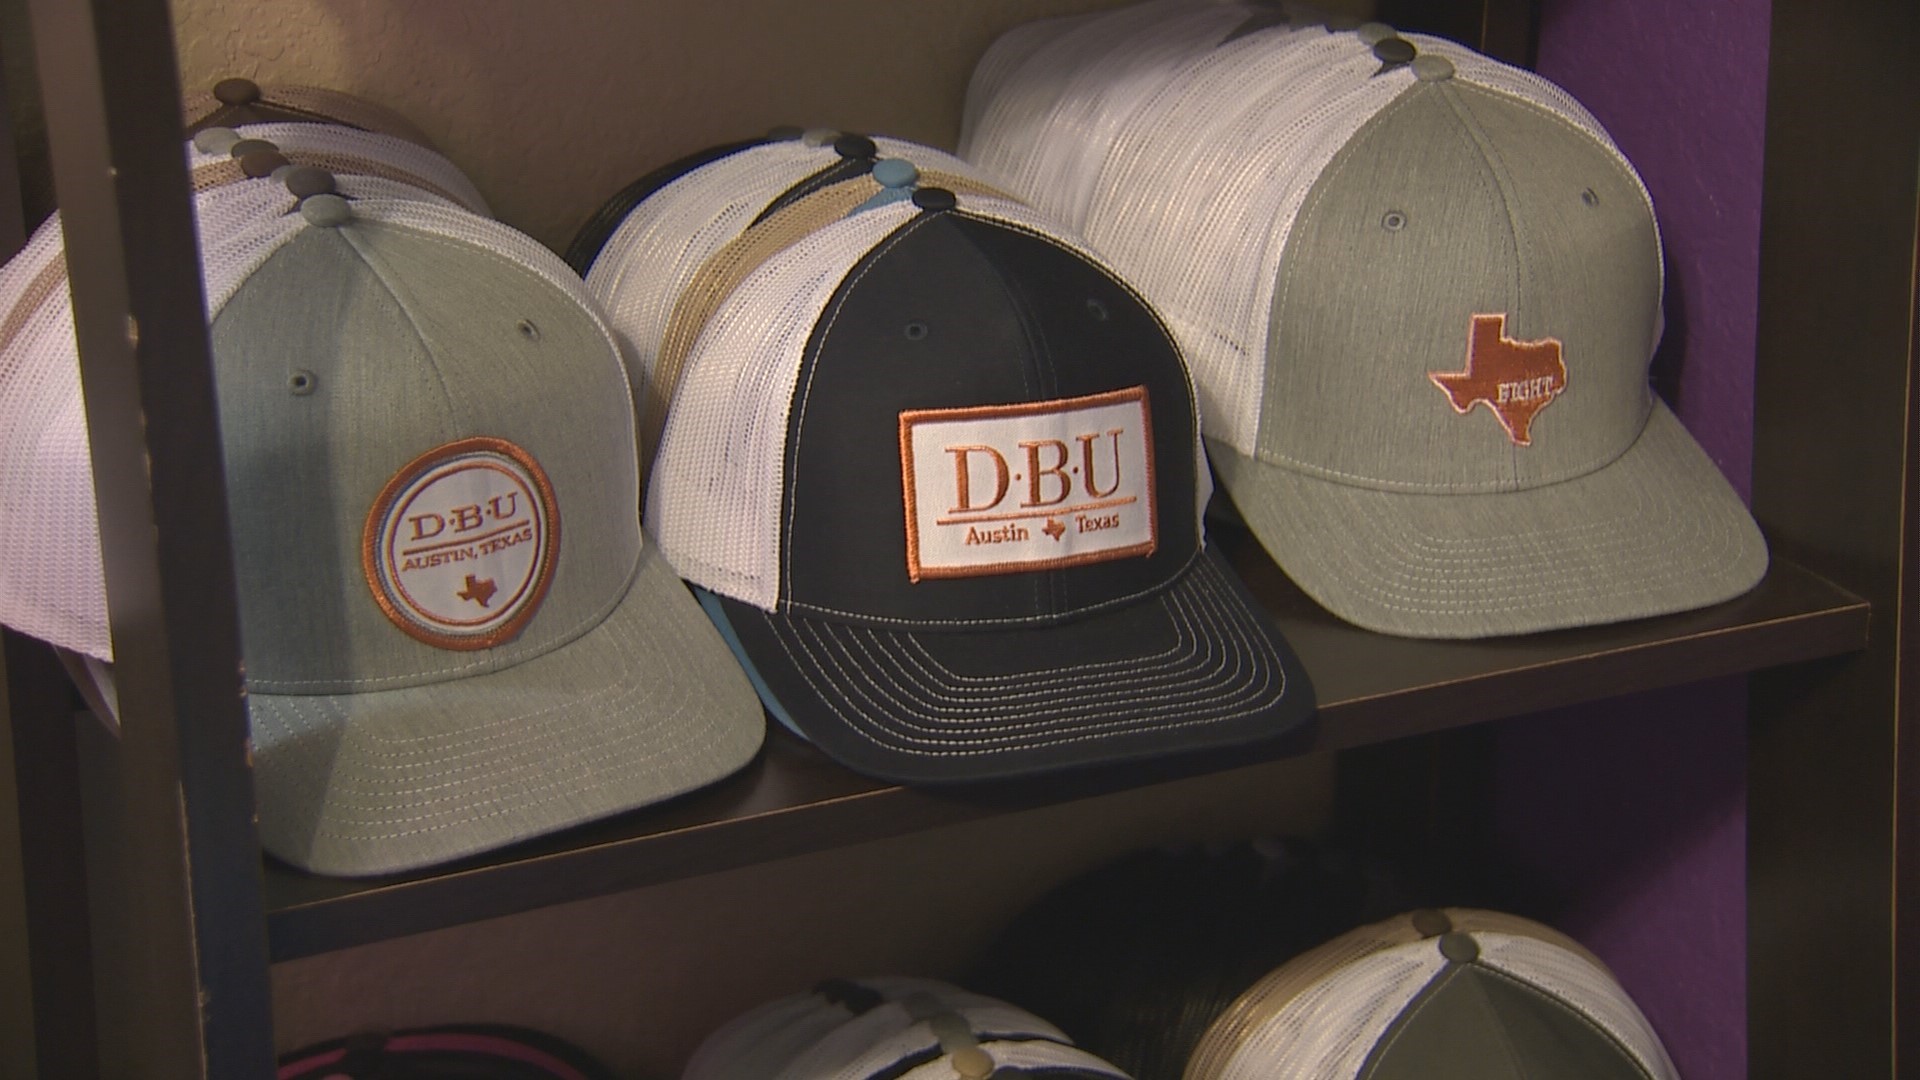 Last Stand Hats sold their first custom hat in early 2019 and the business has continued to grow.